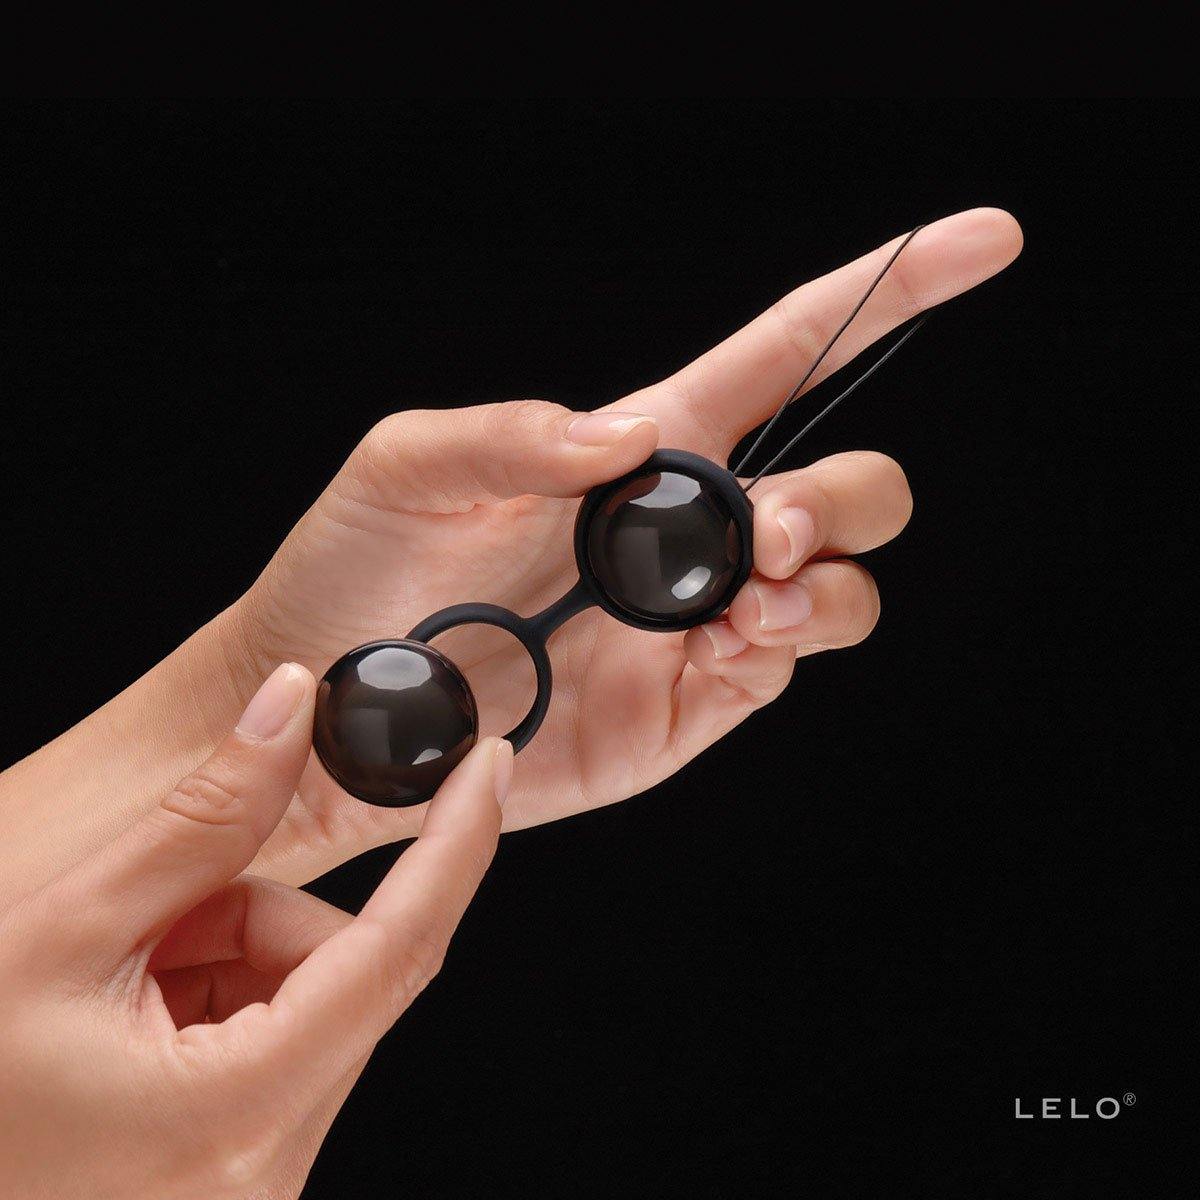 Lelo Luna Beads Noir - Buy At Luxury Toy X - Free 3-Day Shipping